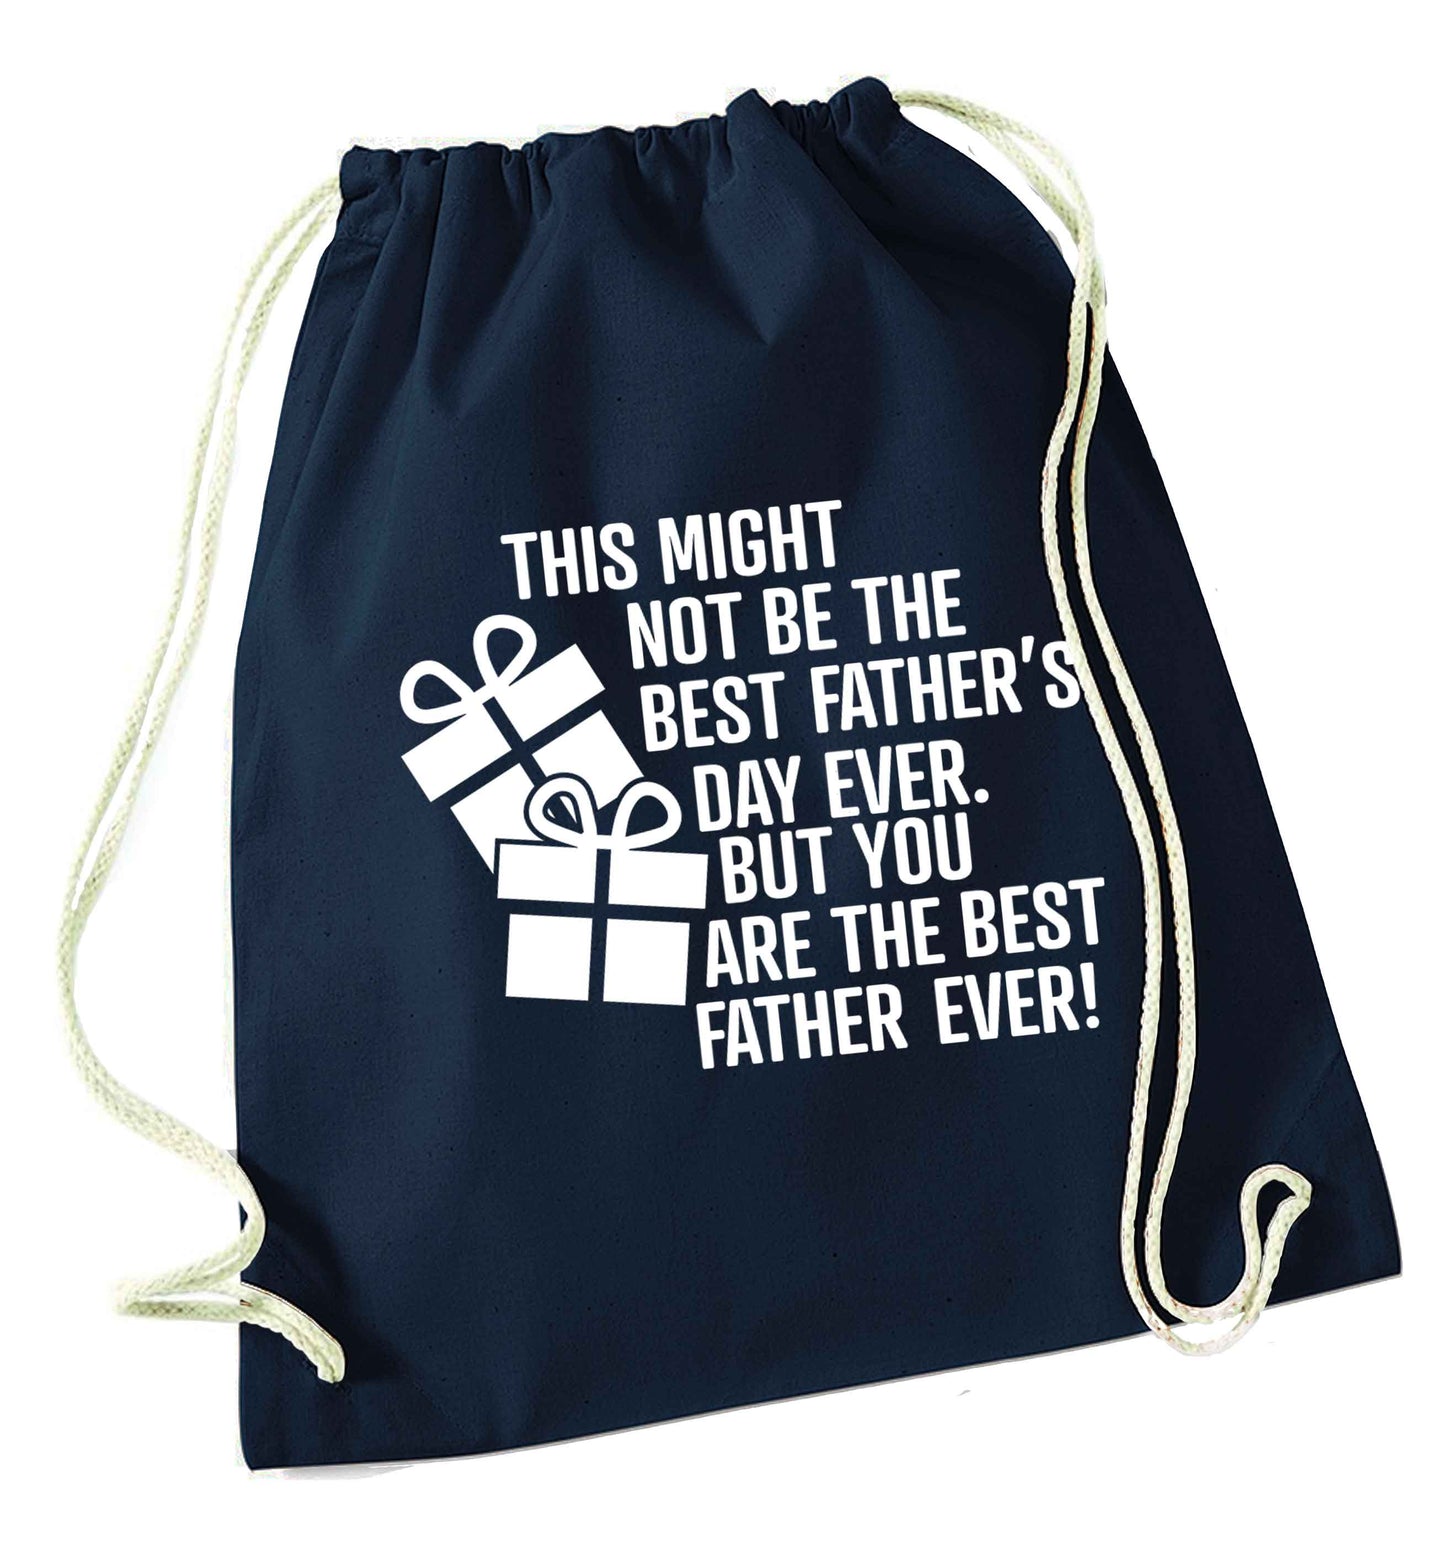 It might not be the best Father's Day ever but you are the best father ever! navy drawstring bag